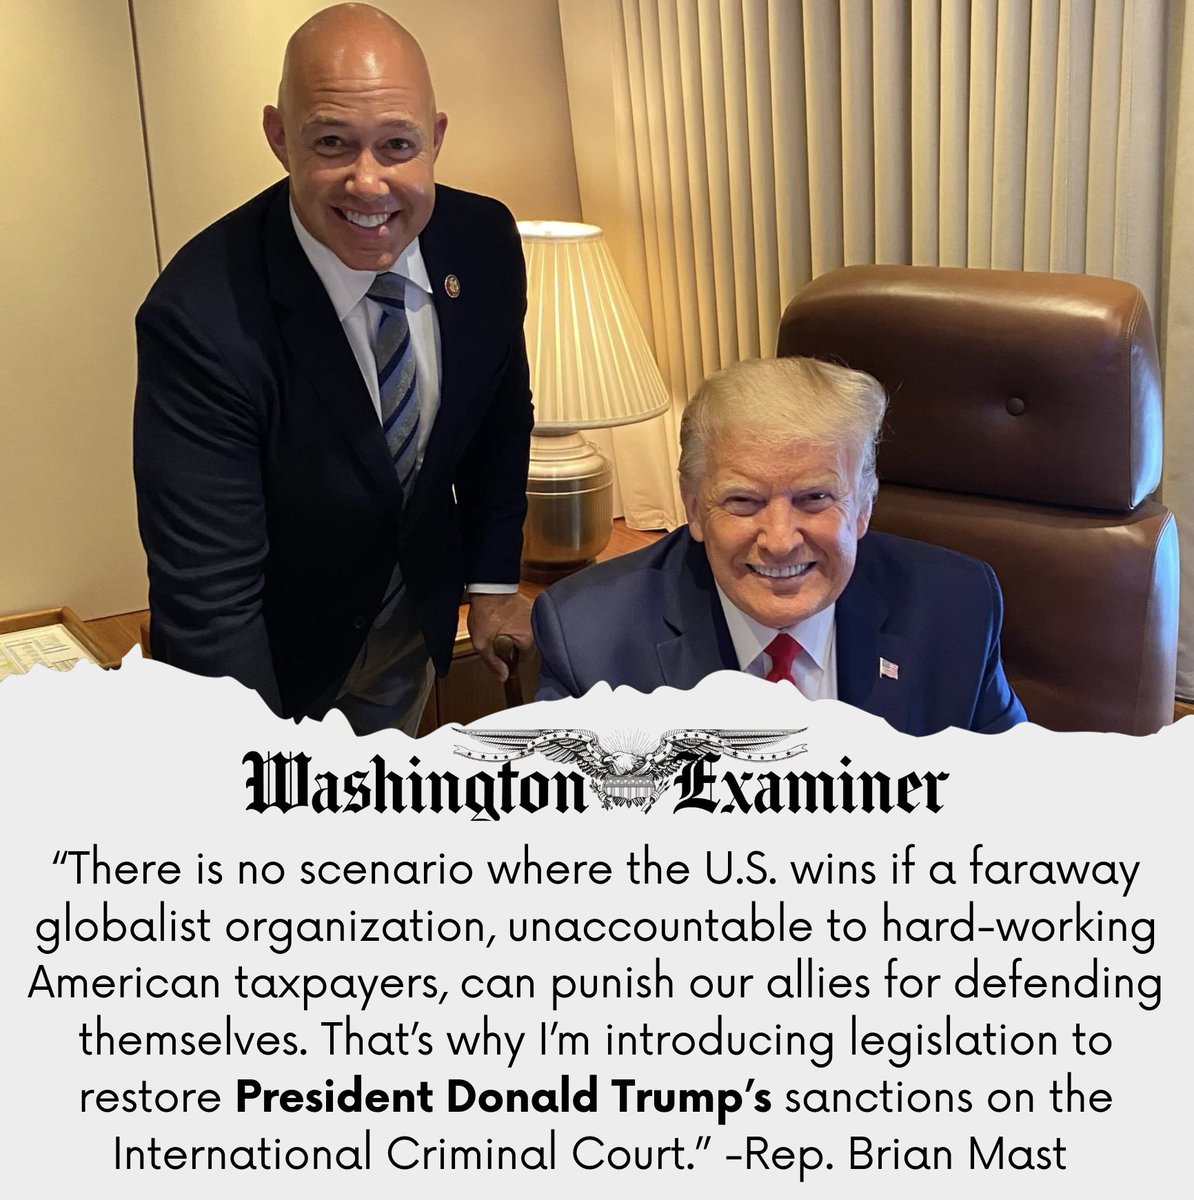 I’m introducing legislation to restore President Donald Trump’s sanctions on the International Criminal Court.

Trump understood that no globalist organization can bully America or our allies. Joe Biden does not.